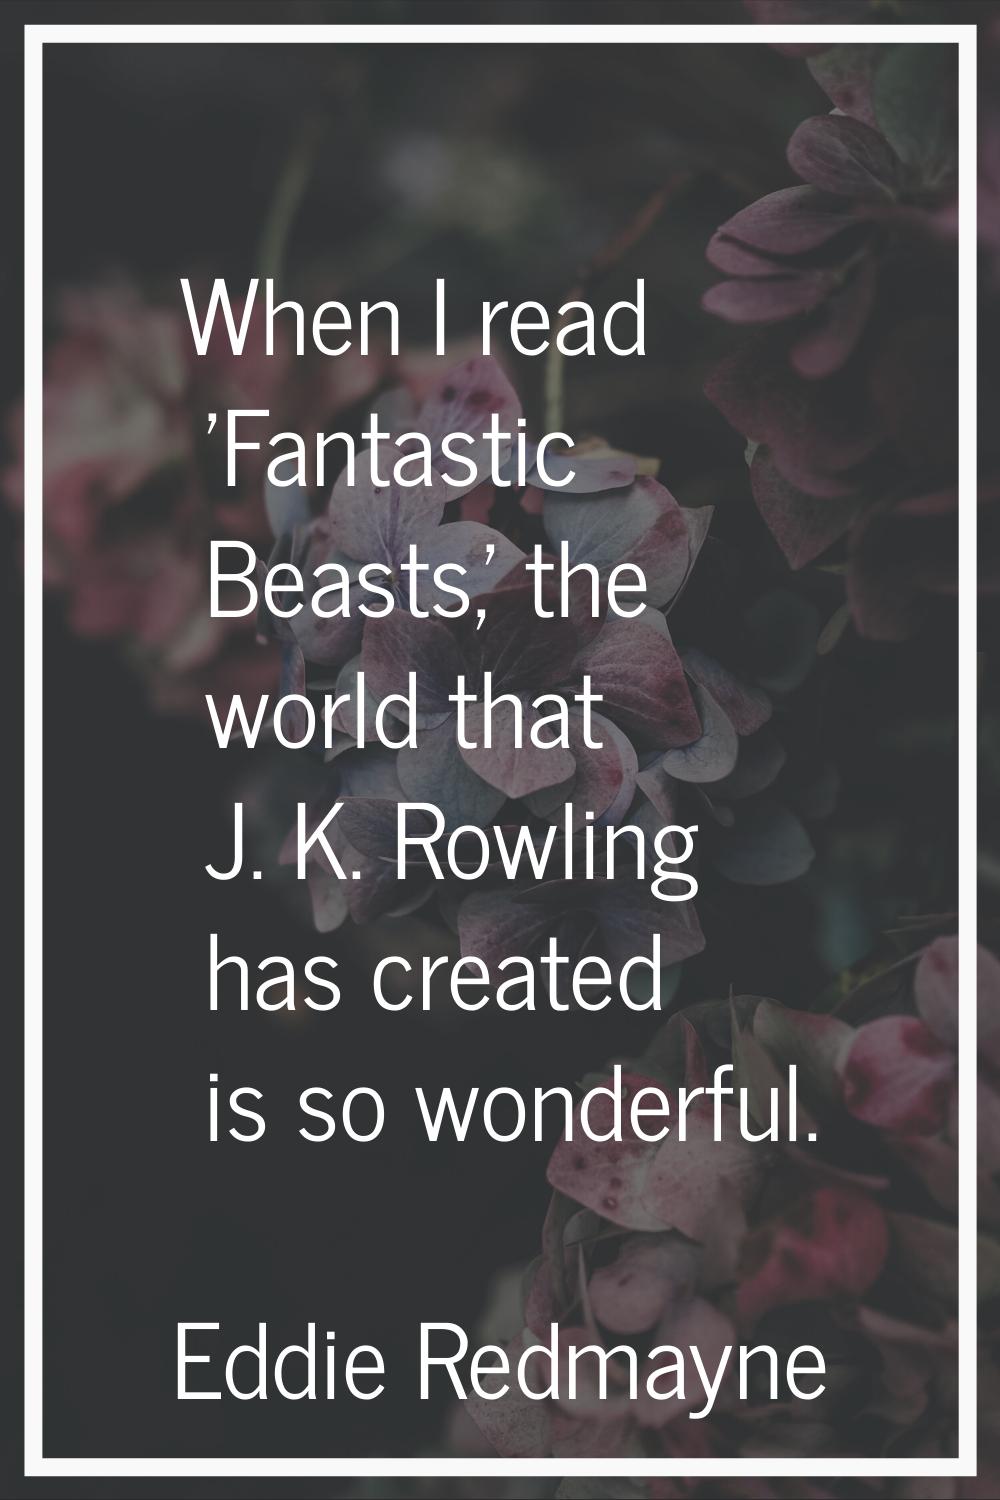 When I read 'Fantastic Beasts,' the world that J. K. Rowling has created is so wonderful.